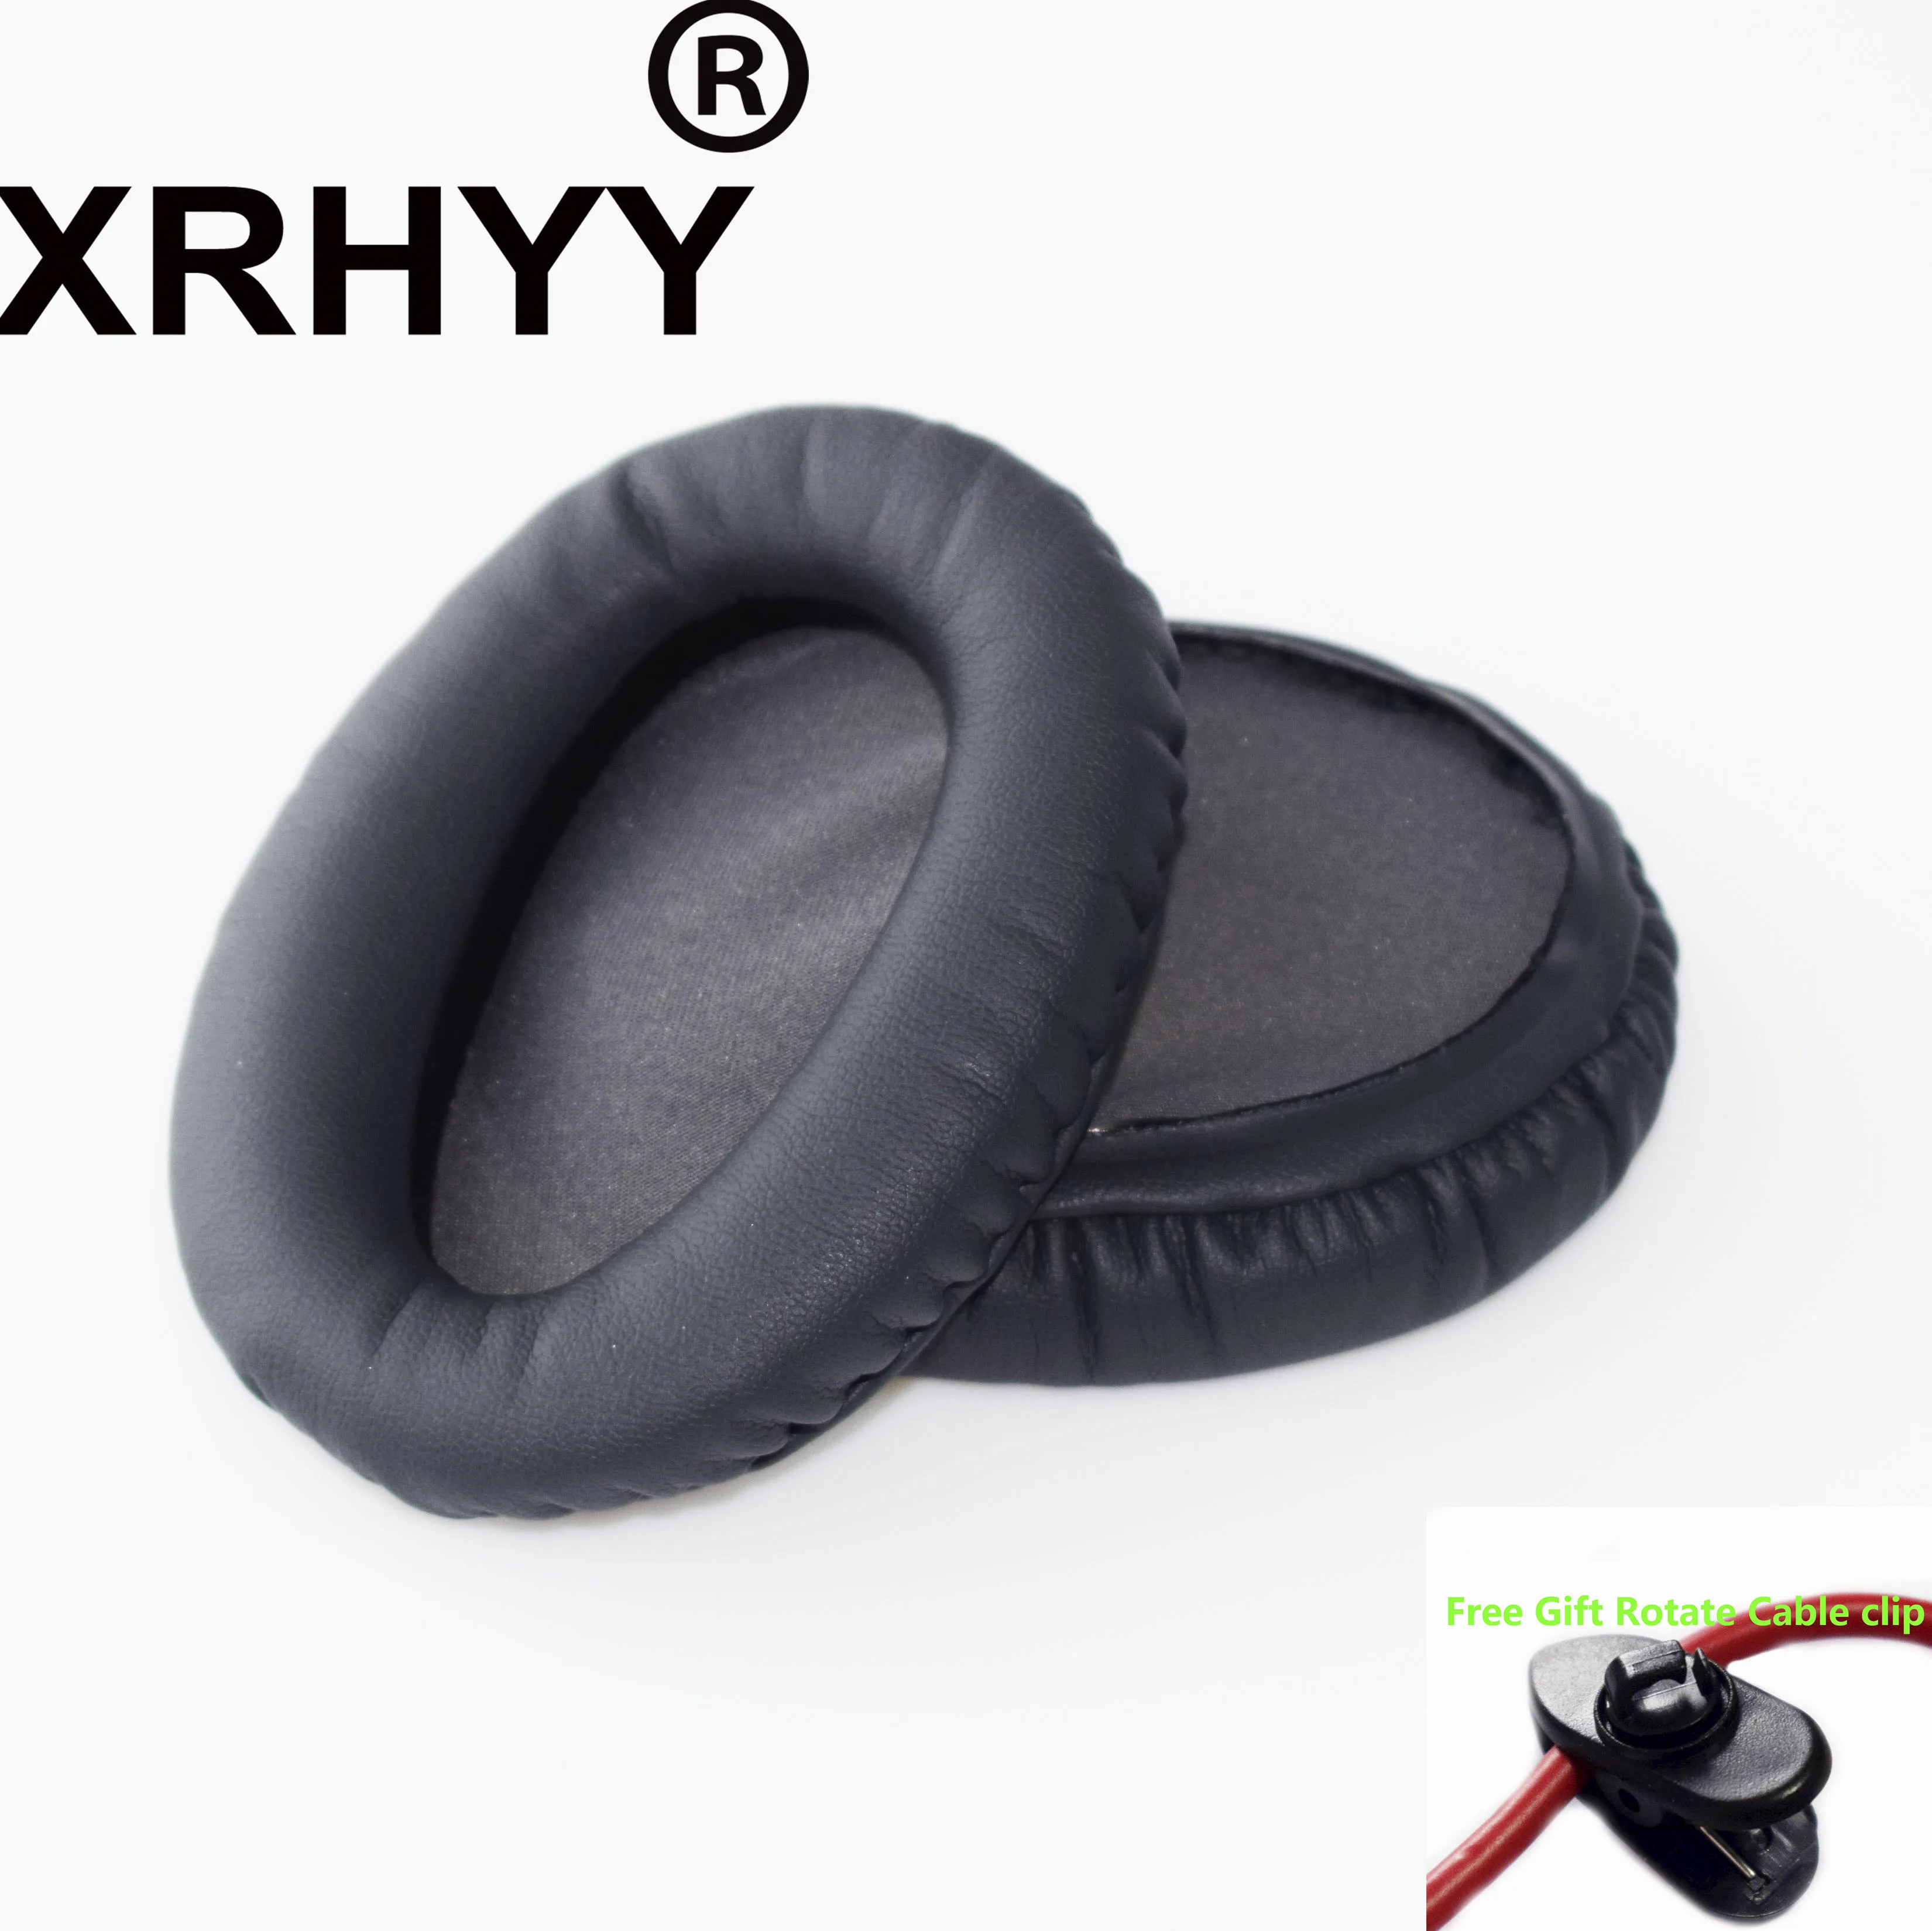 

XRHYY 1 Pair Replacement Earpads Ear Pads Cushion Foam For Sony CH700N Wireless Bluetooth Noise Cancelling Headphones